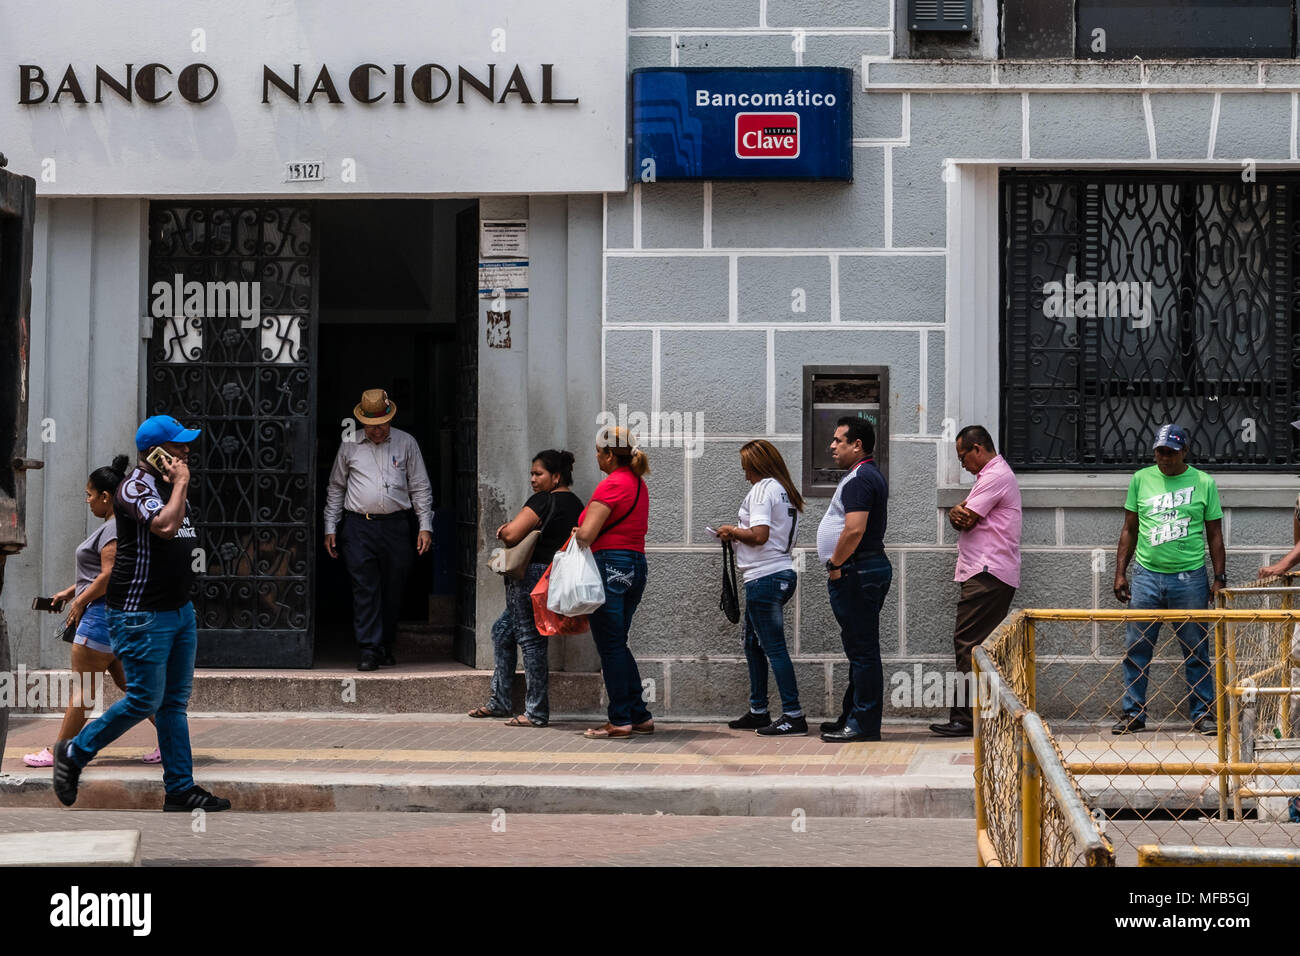 Panama City, Panama - march 2018: Many people standing in queue waiting in front of bank (Banco Nacional) buling in  Panama City Stock Photo